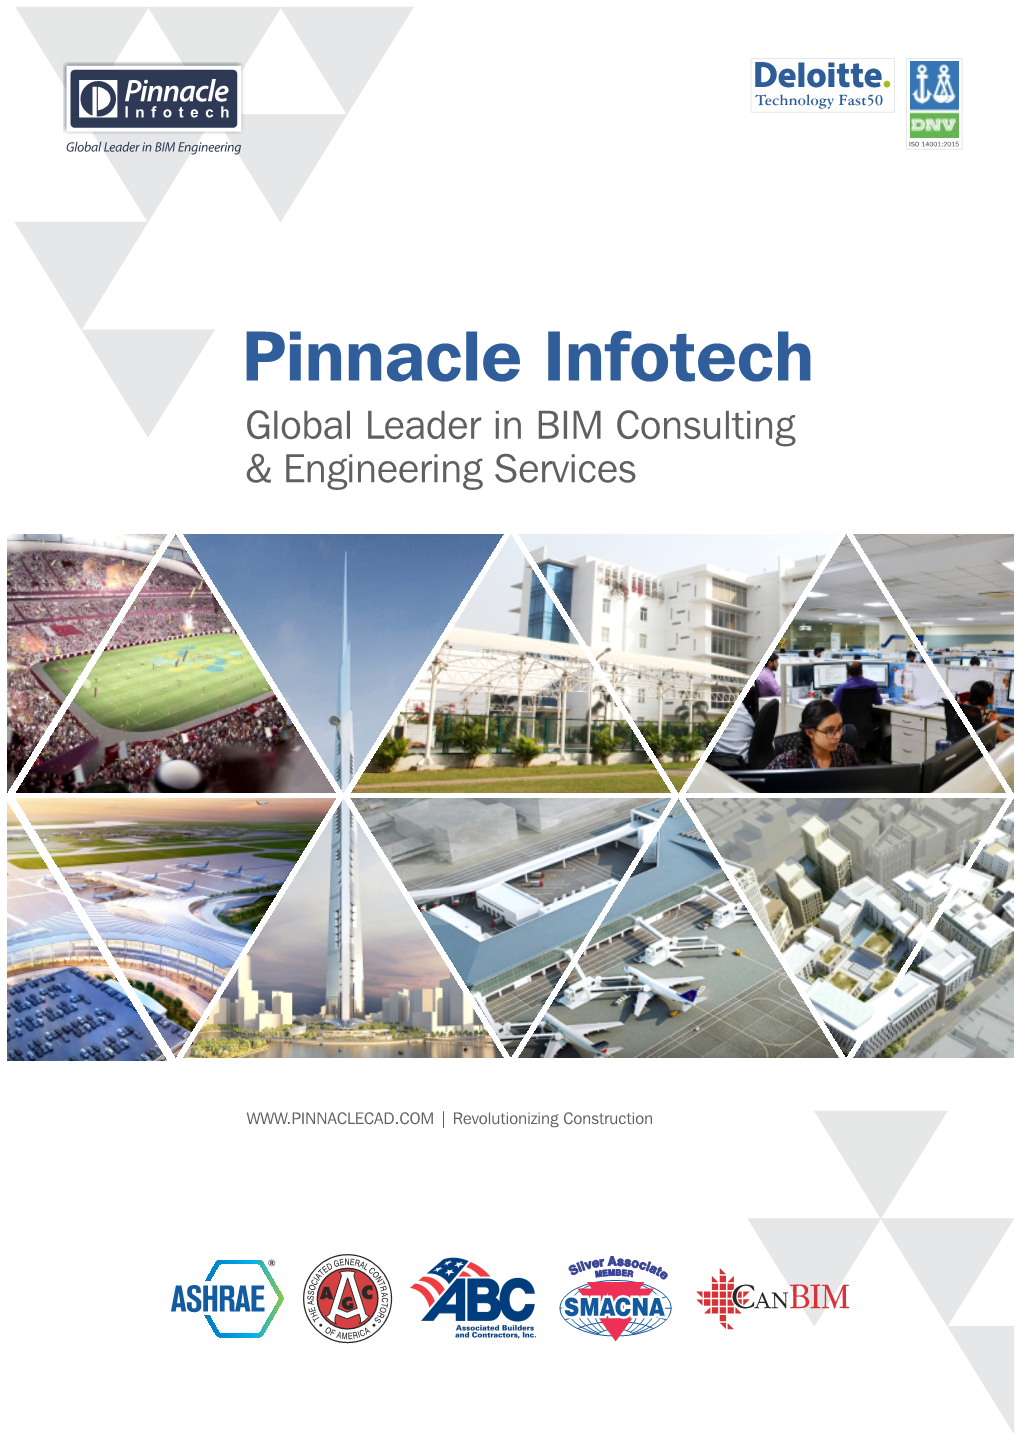 Pinnacle Infotech Global Leader in BIM Consulting & Engineering Services